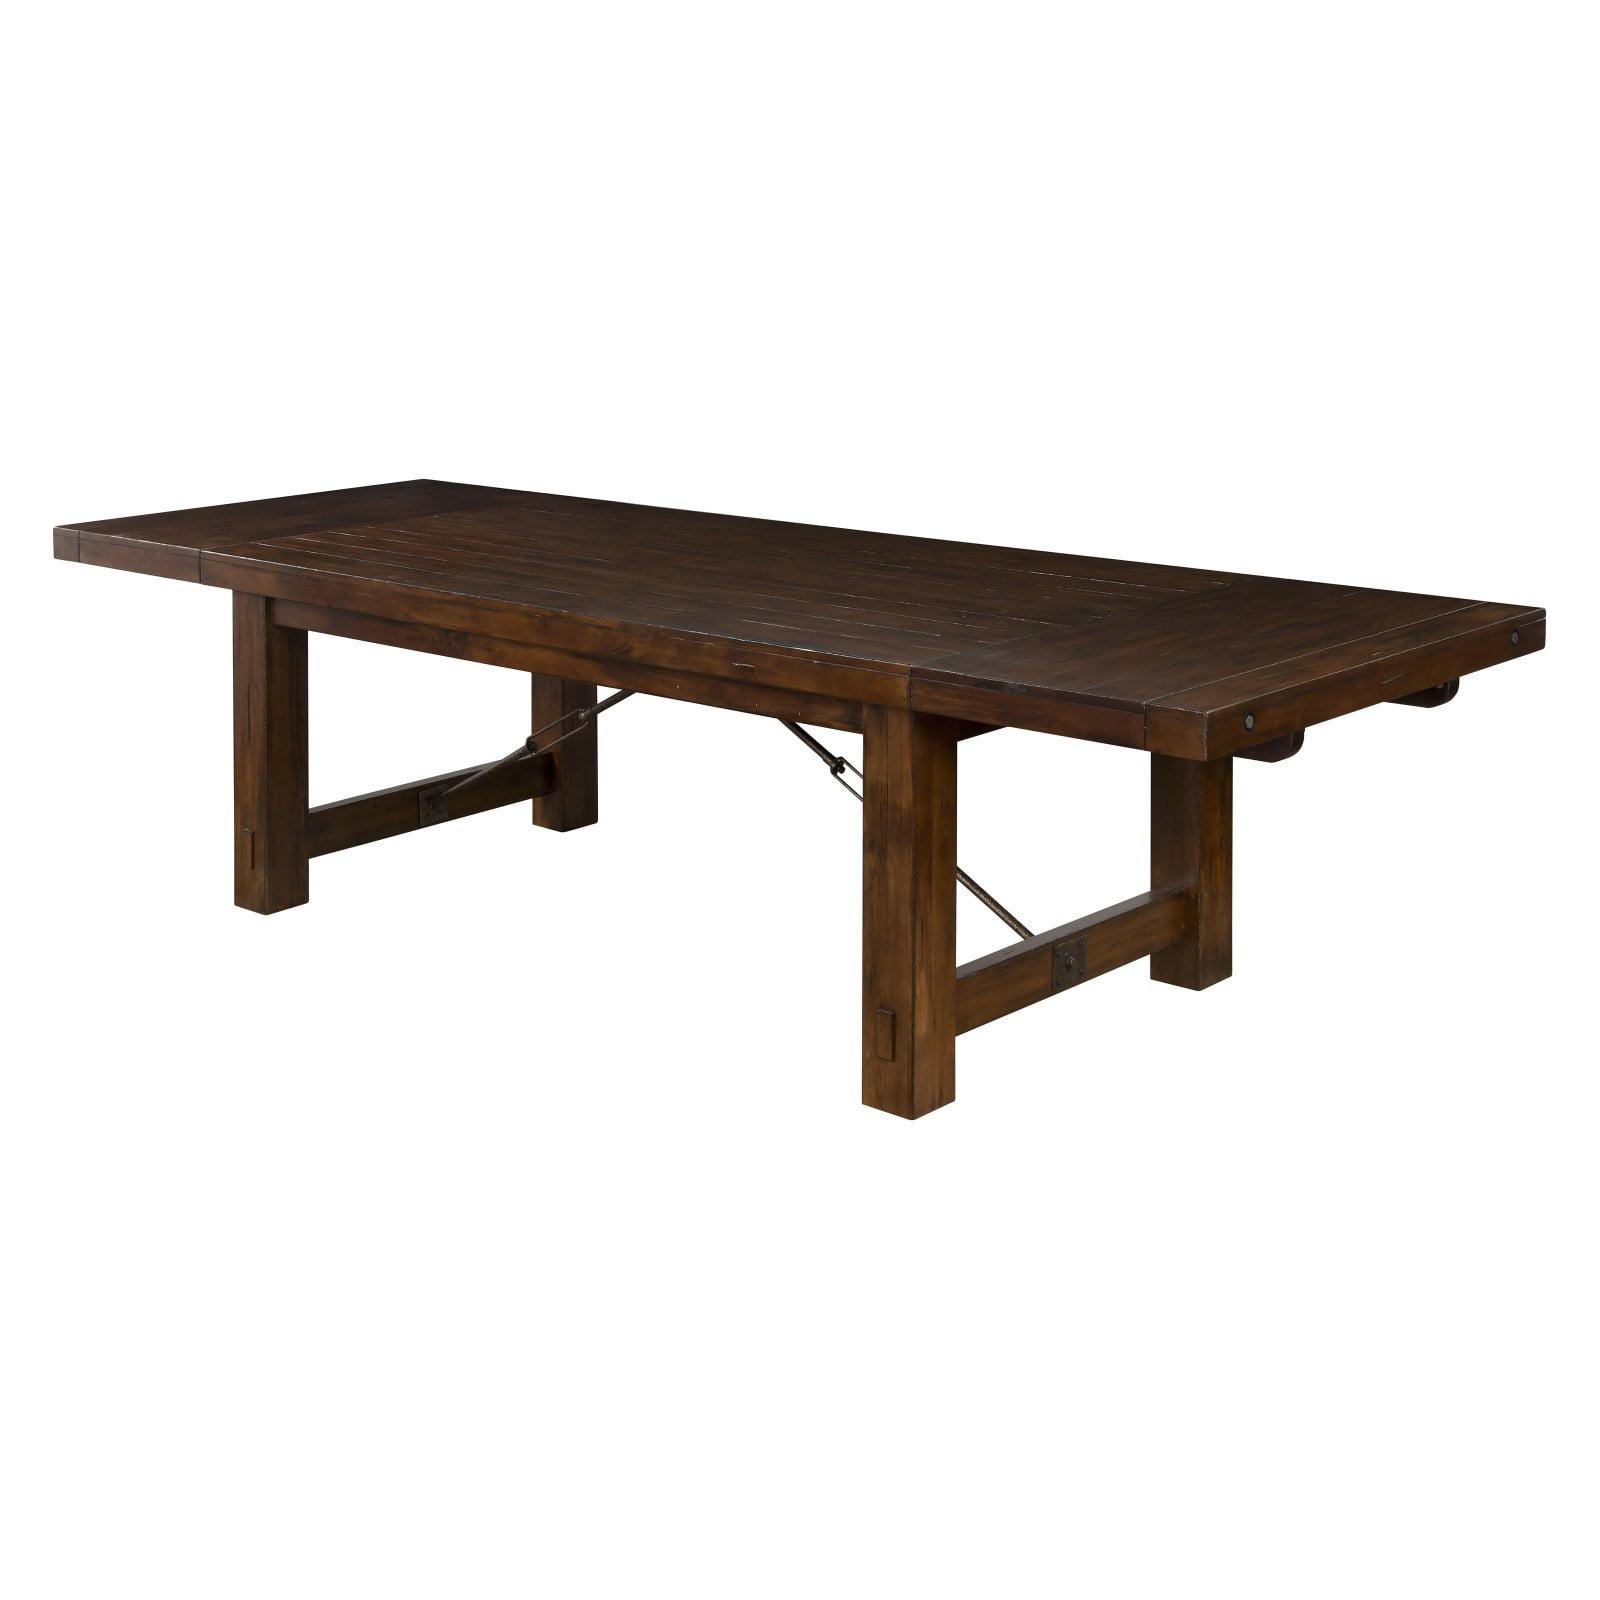 Rustic Reclaimed Mahogany 42"x122" Extendable Dining Table in Brown